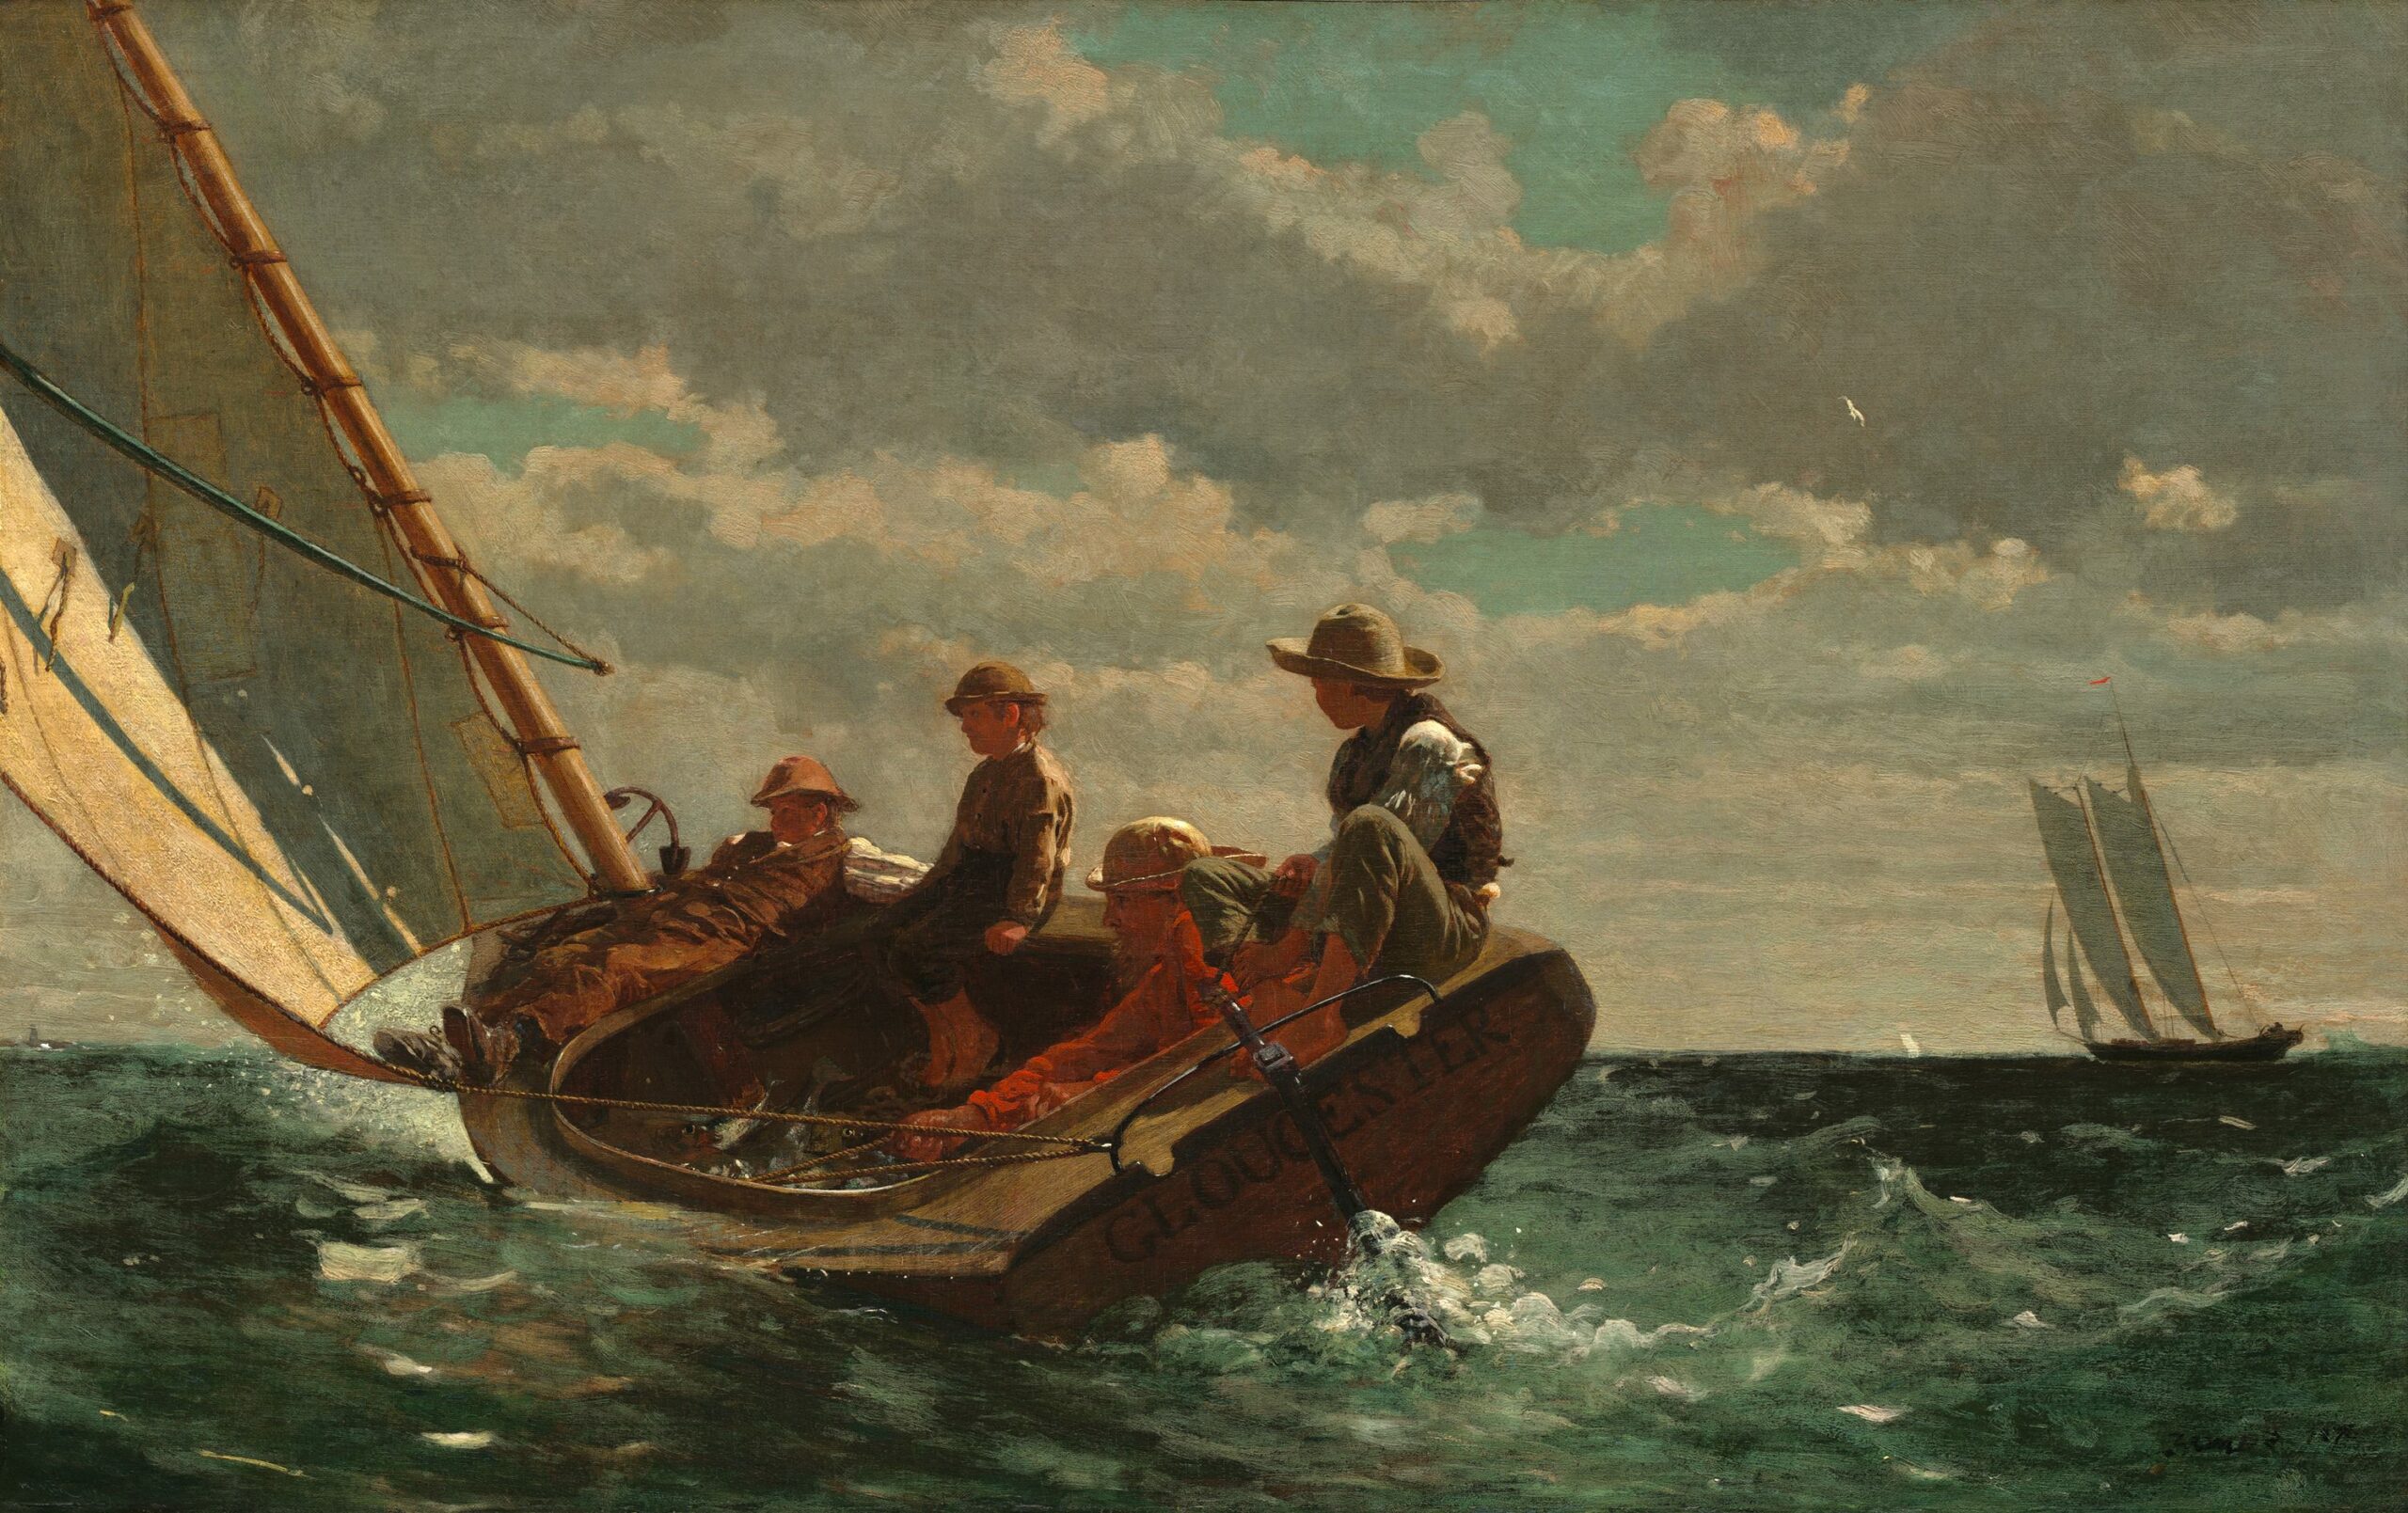 Breezing Up by Winslow Homer